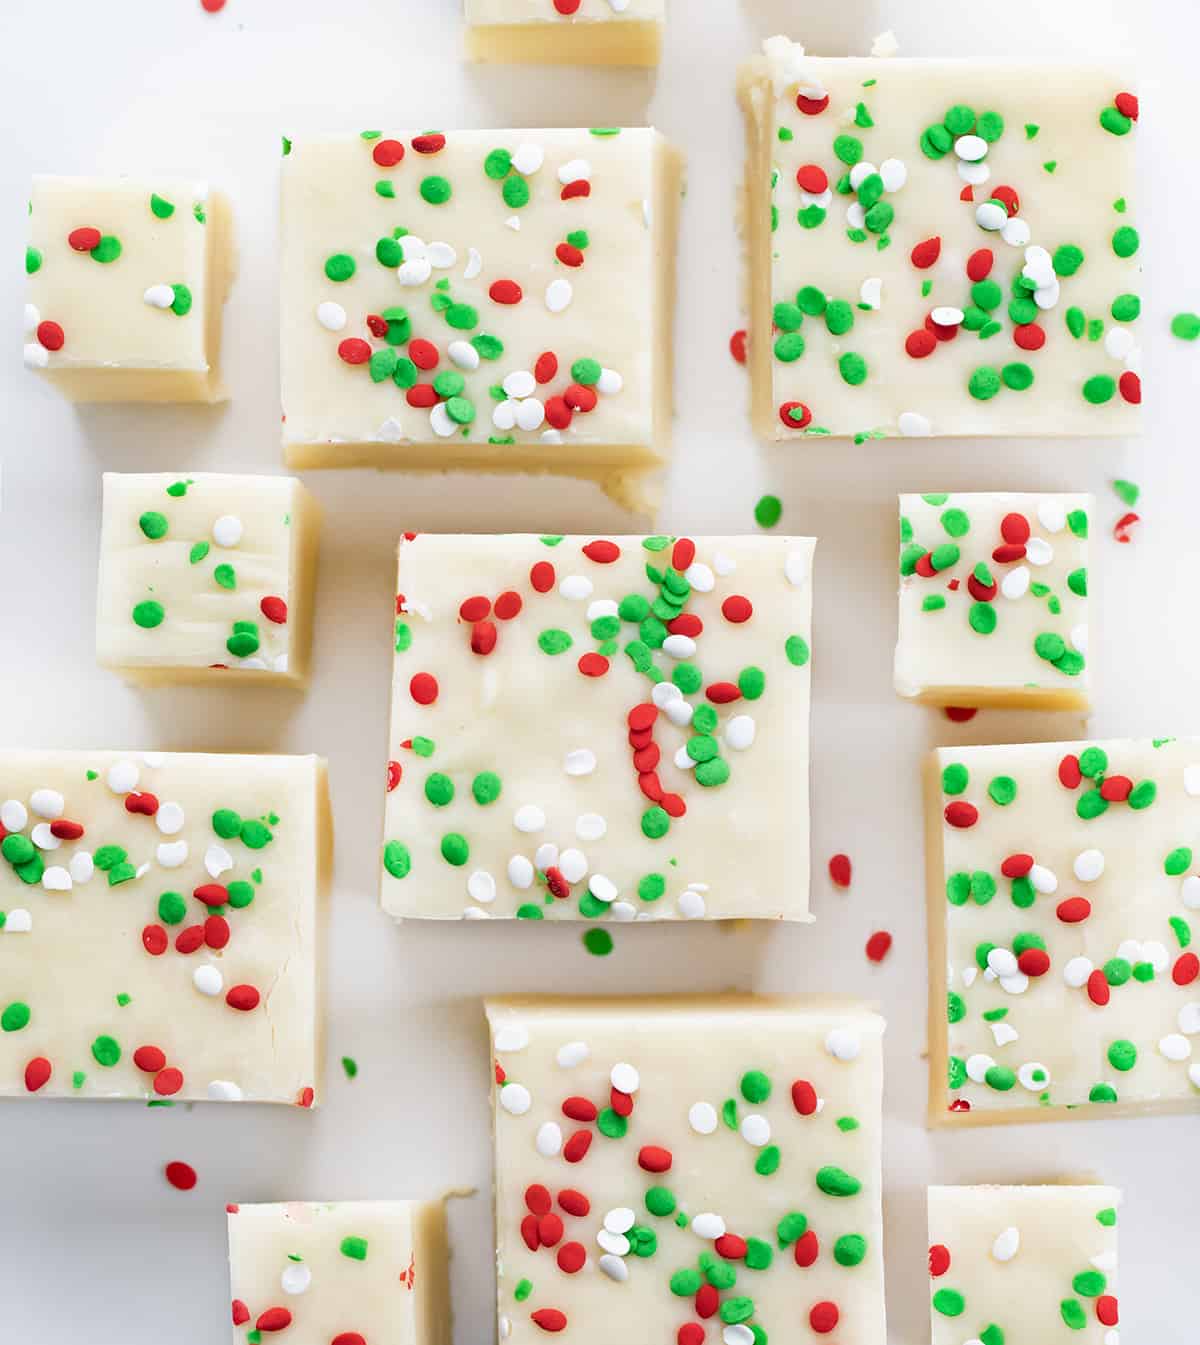 Pieces of Sugar Cookie Fudge on a White COunter with Green and Red Spinkles.